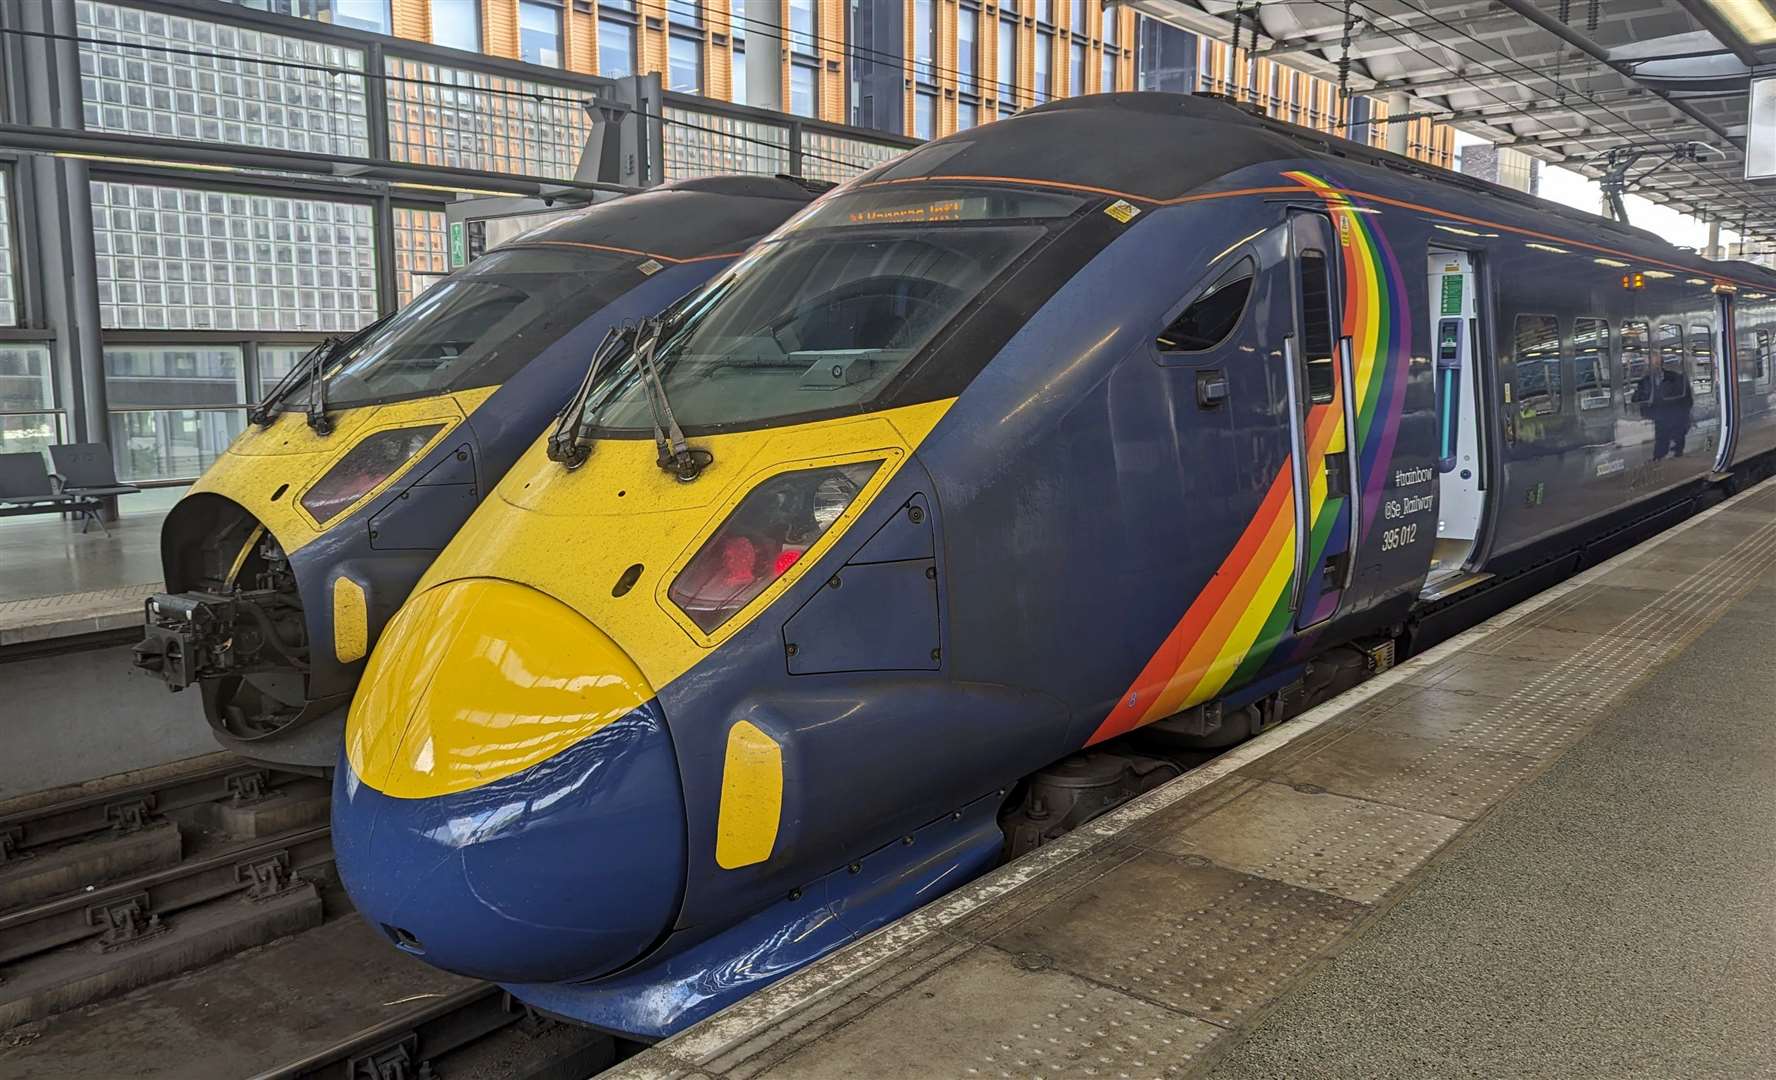 The refurbished train at St Pancras this lunchtime